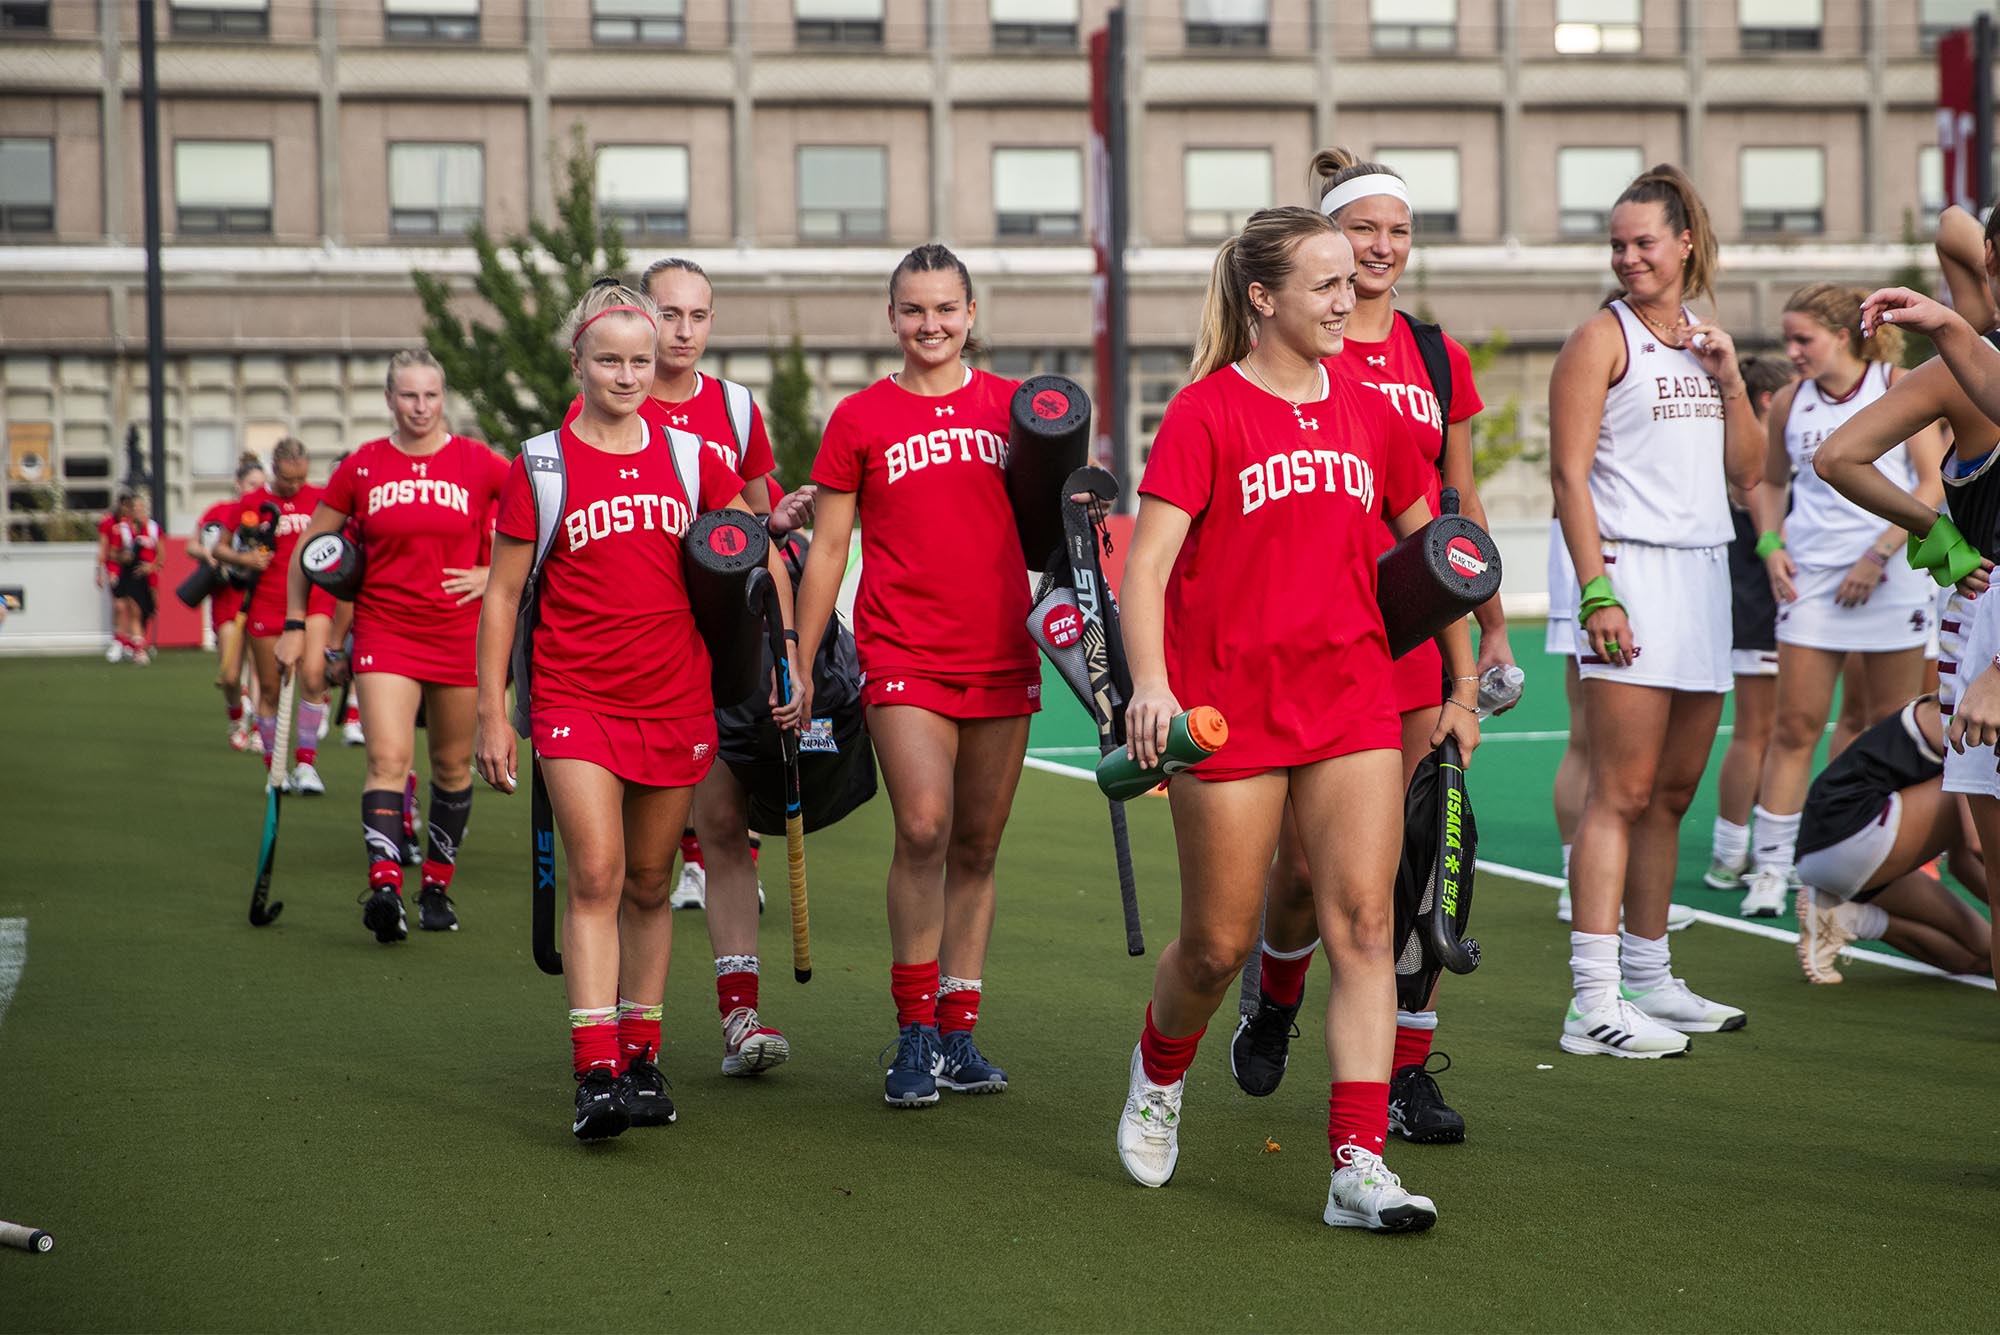 Photo: A group of women's field hockey players on Boston University's college team walk onto the pitch in red uniforms